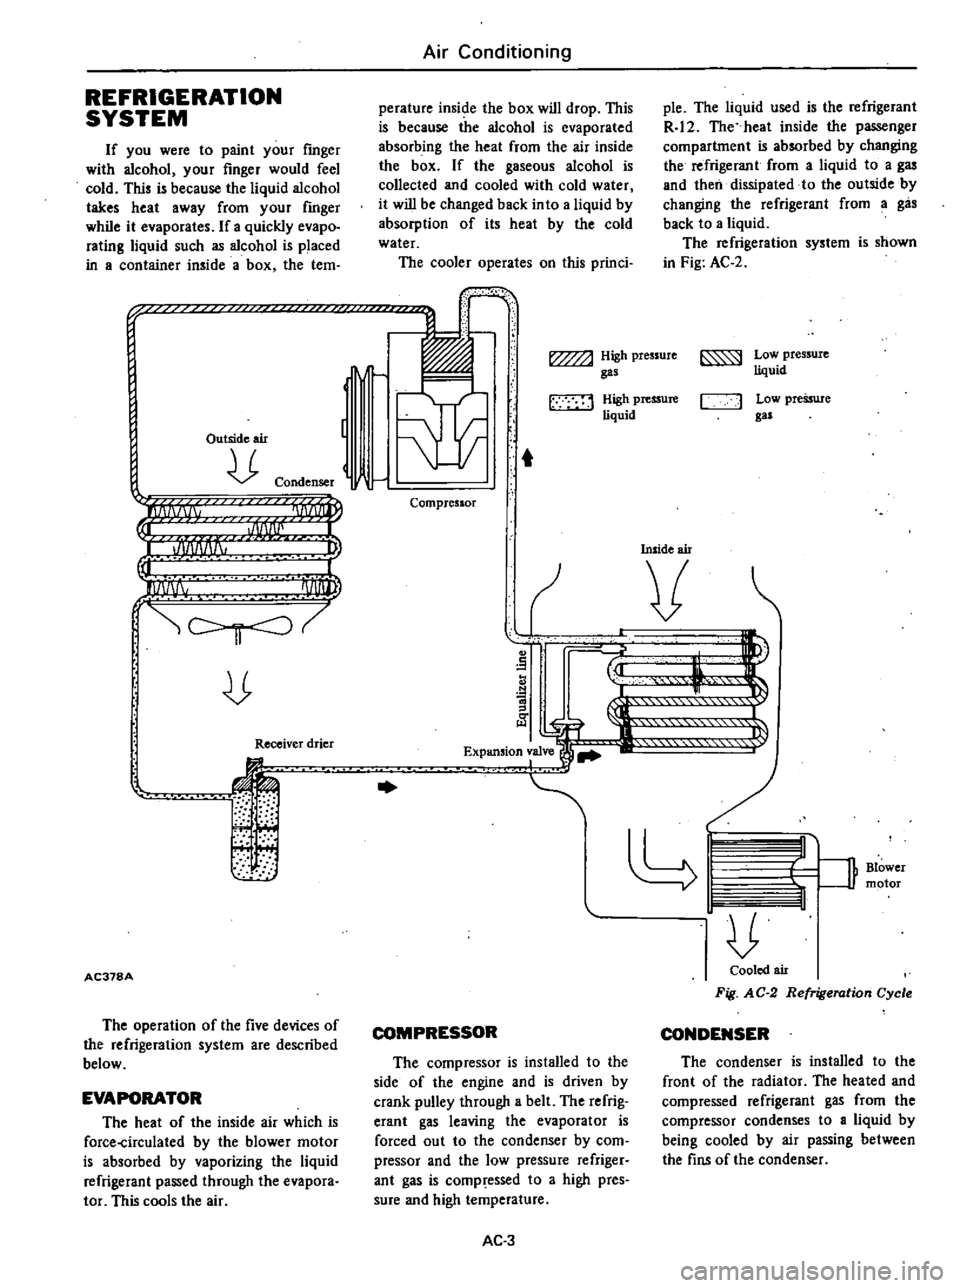 DATSUN 210 1979  Service Manual 
REFRIGERATION

SYSTEM

If

you 
were 
to

paint 
your 
rmger

with 
alcohol

your 
finger 
would 
feel

cold 
This 
is

because 
the

liquid 
alcohol

takes 
heat

away 
from

your

rmger

while 
it
